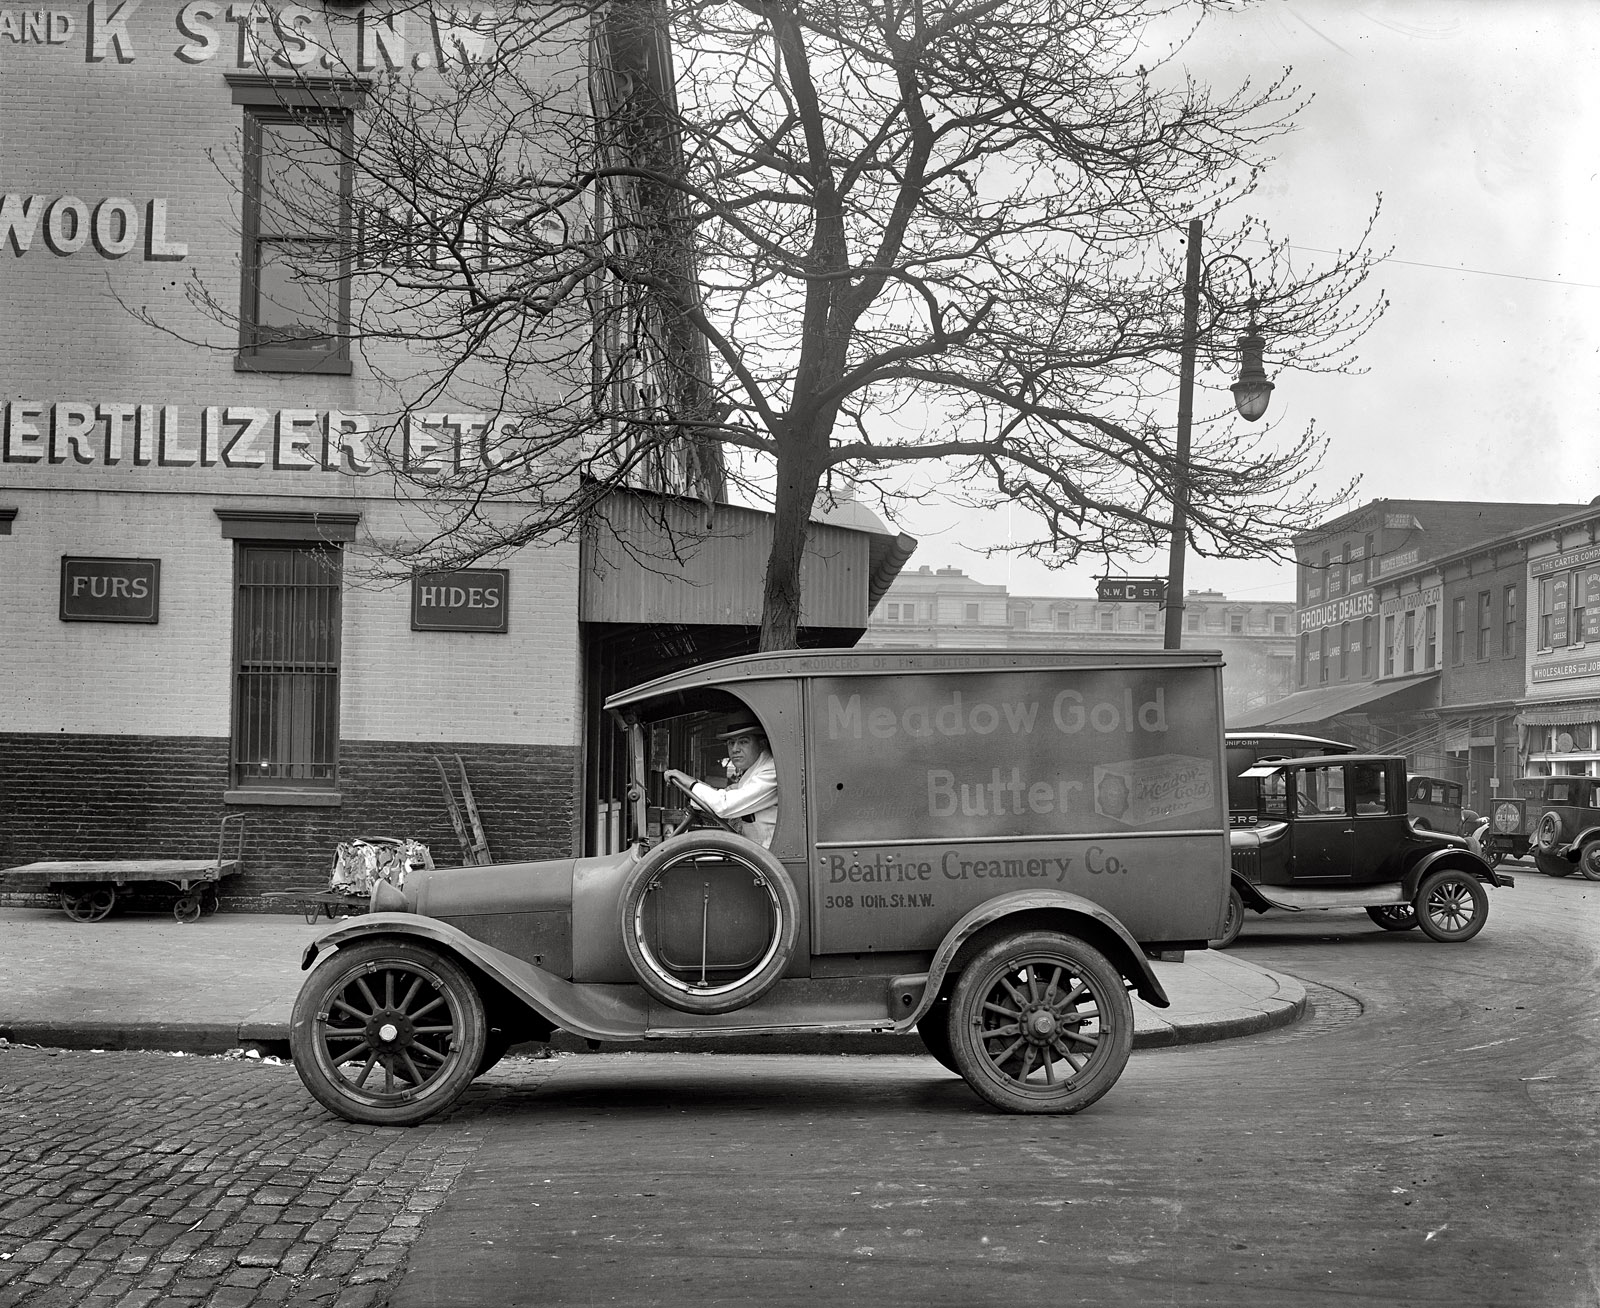 Washington, D.C. "Semmes Motor Co. Meadow Gold Butter truck, 1926." C Street N.W. at 10th. (And running in front of the building at the back was something called "Little B Street.") National Photo Company glass negative. View full size.